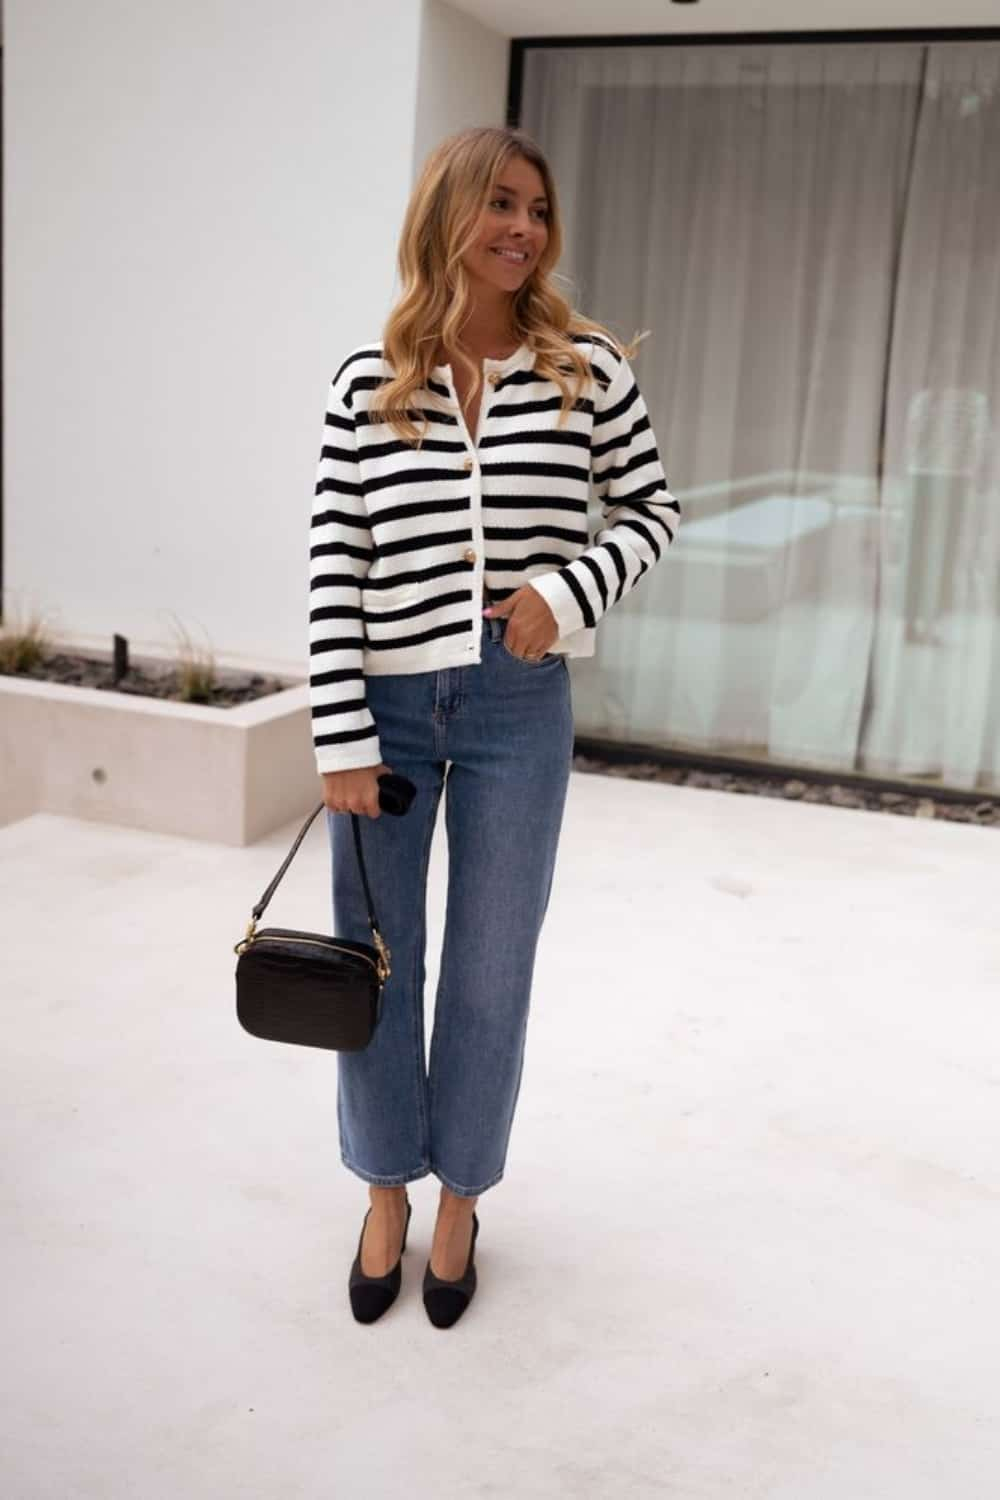 Striped Cardigan as a Top with Jeans